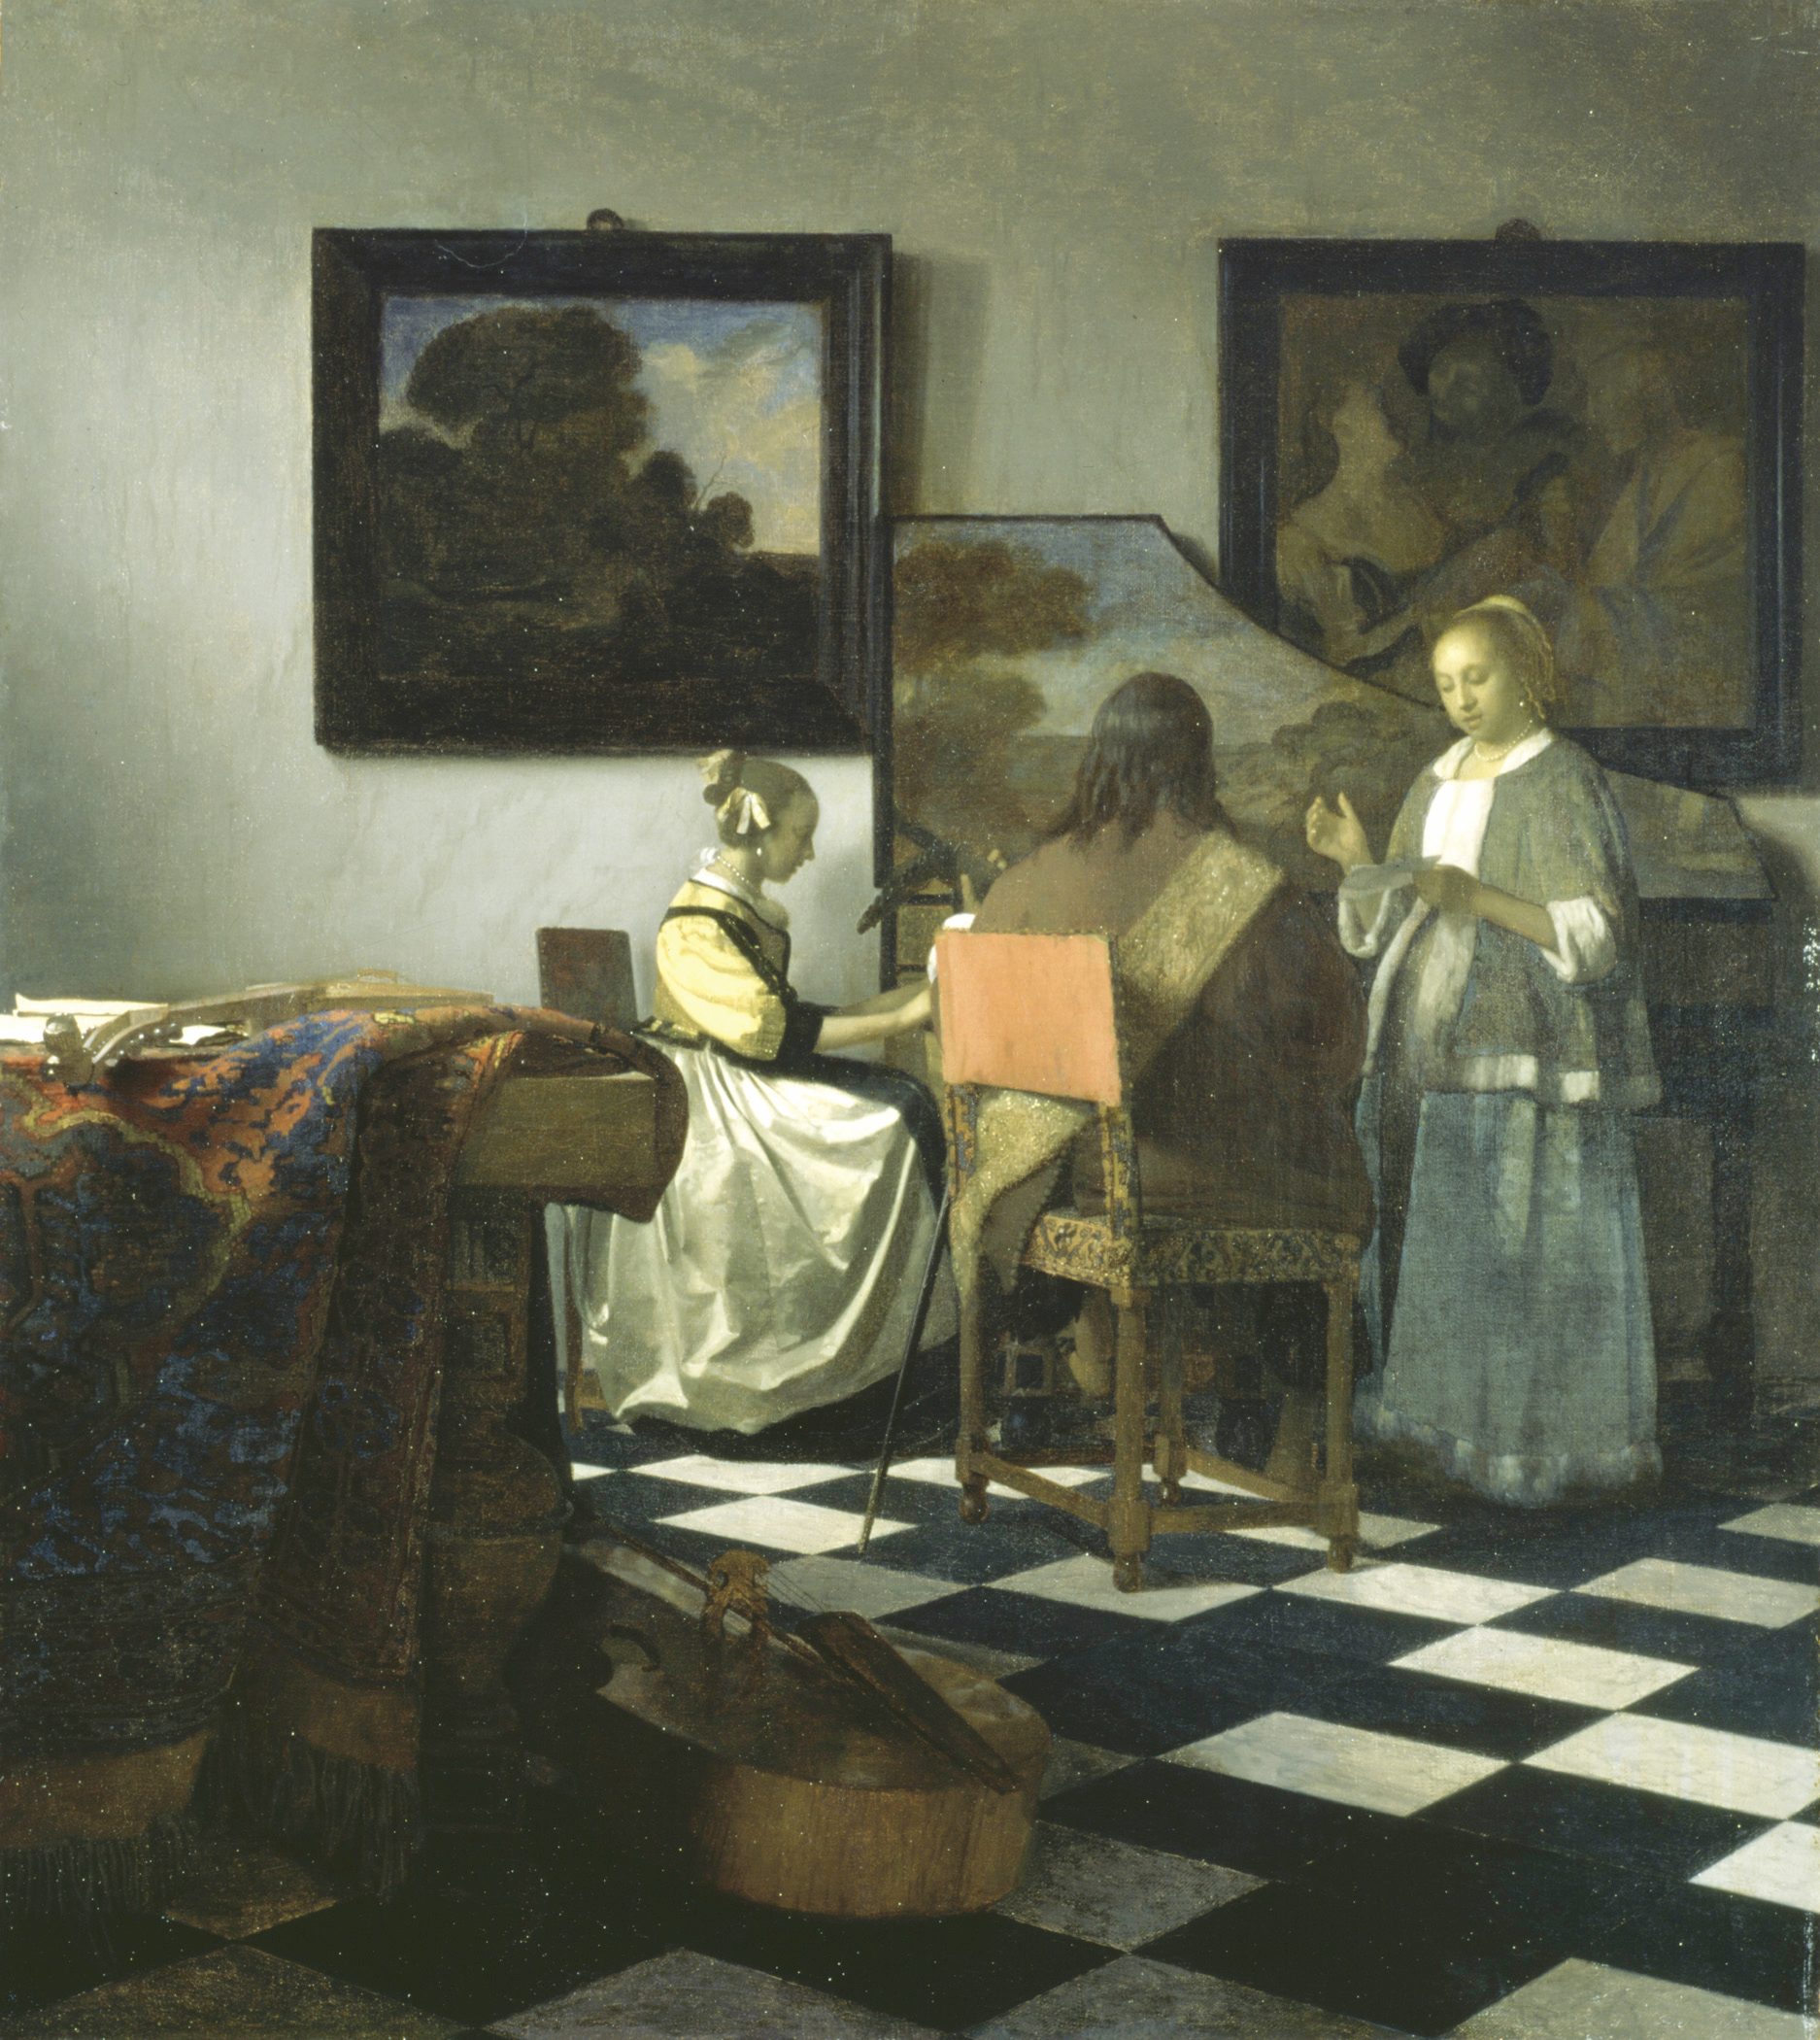 A painting of a room with a checkered floor, a woman is sitting at a grand piano, a man sits next to her. He seems to be a music instructor. Next to them there is another woman standing, she appears to be singing. There are paintings on the wall behind them.